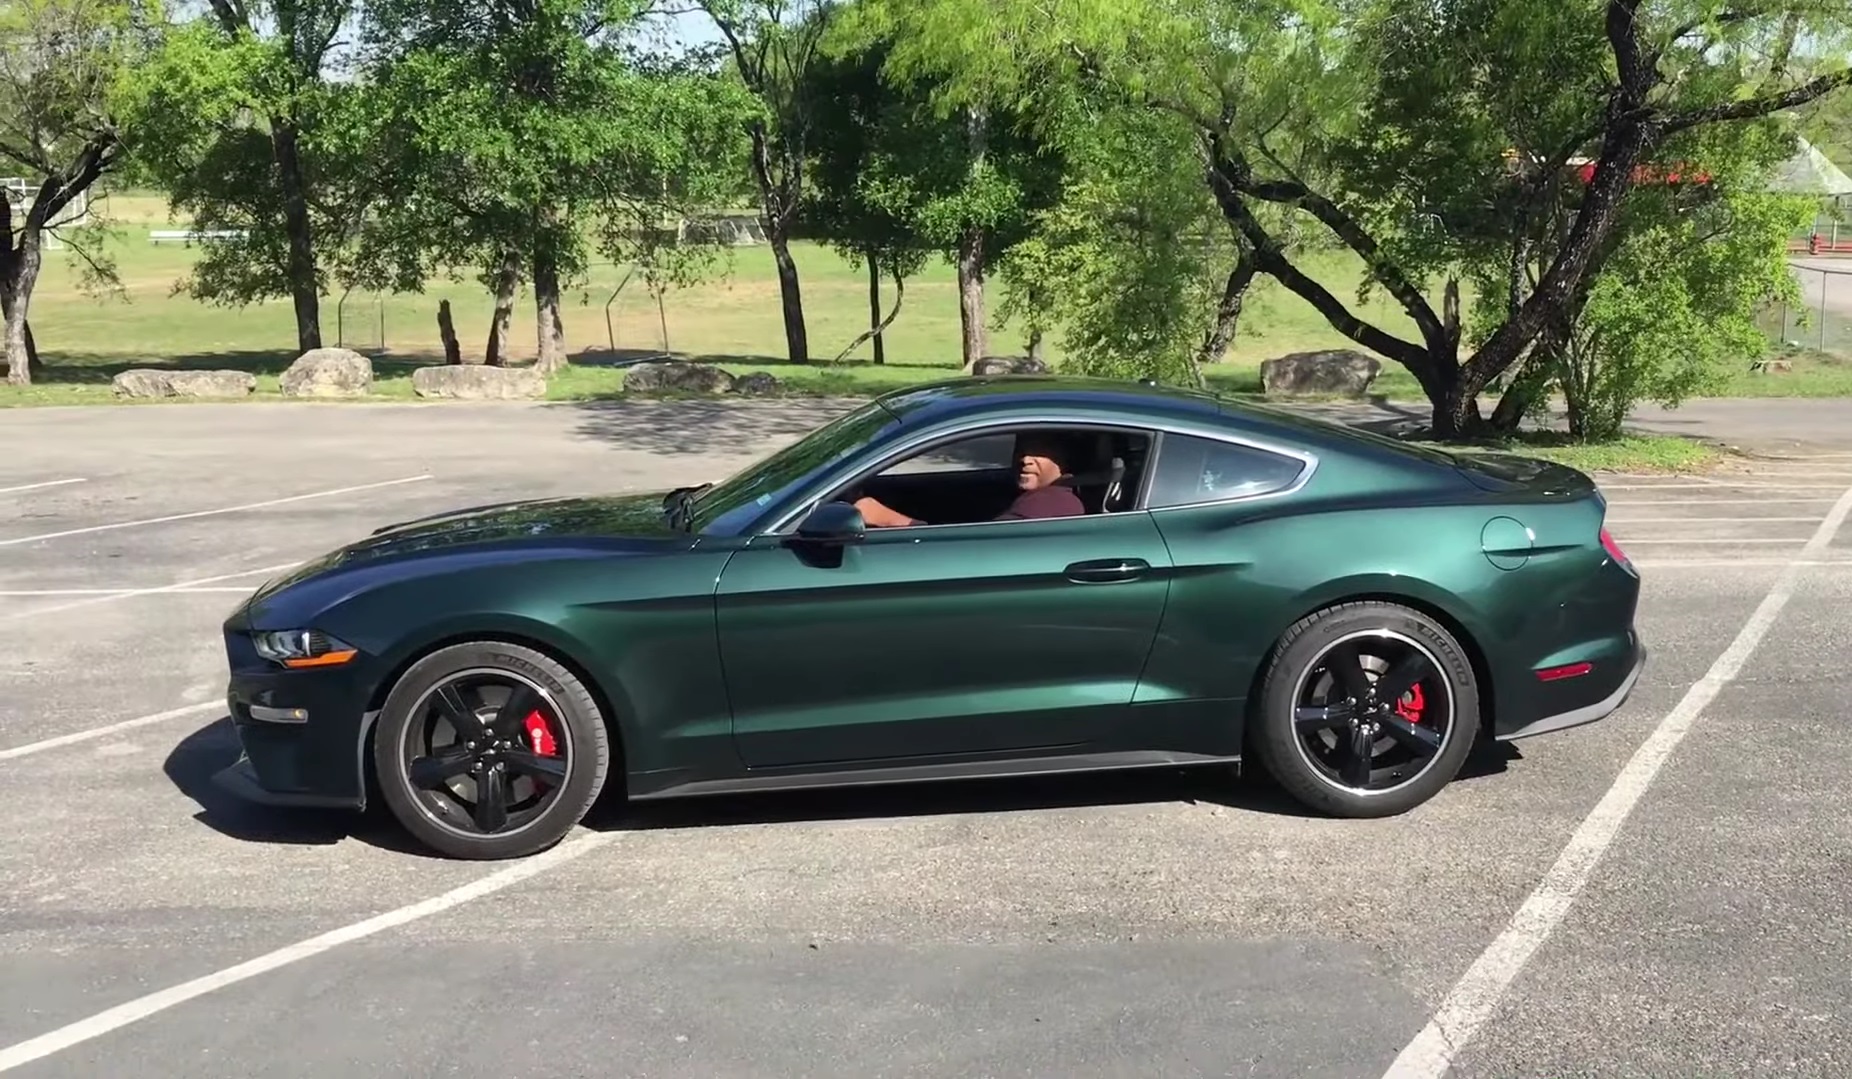 Video: Here’s Why the 2019 Ford Mustang Bullitt is Worth $47,000